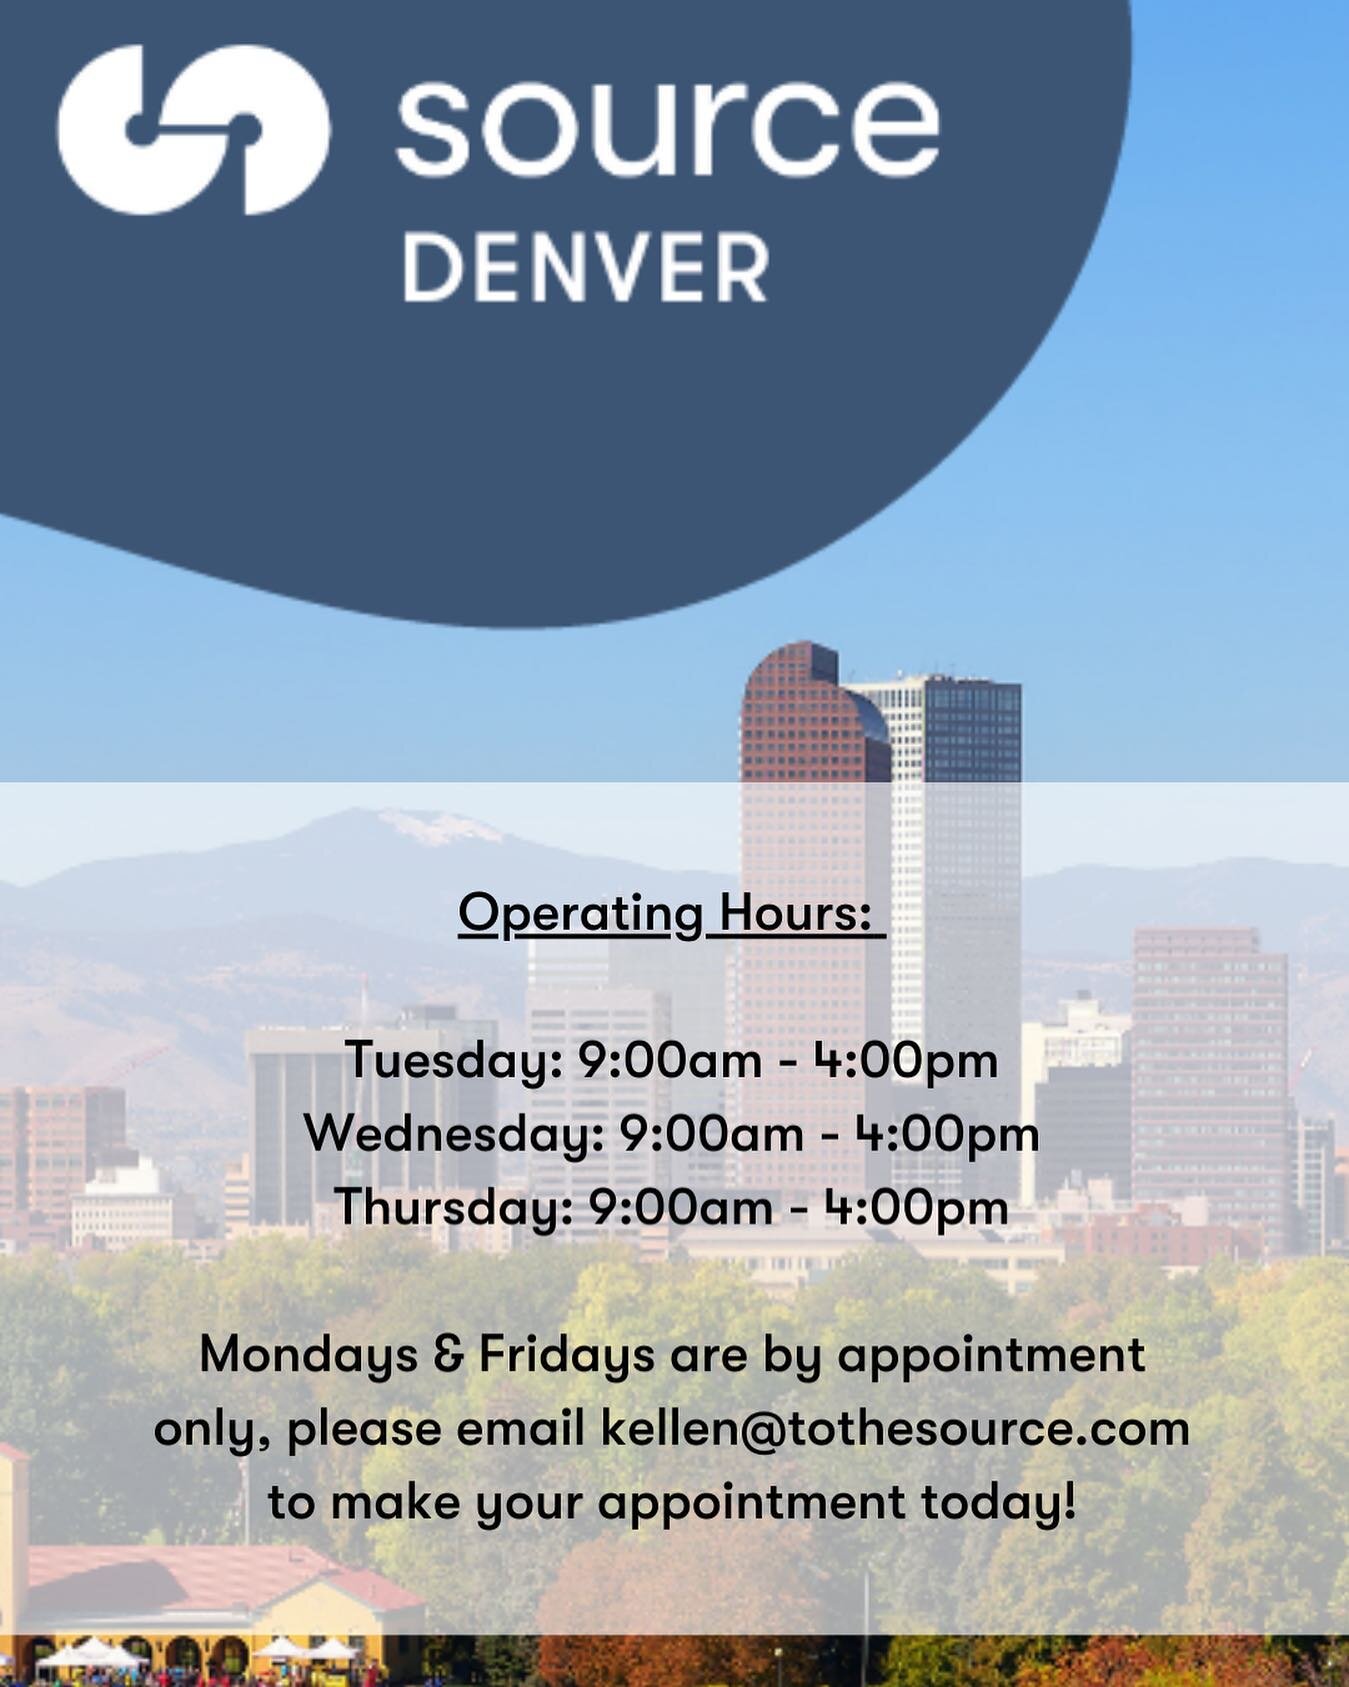 Updated Hours of Operation for our Denver Showroom! 

We can&rsquo;t wait to see you 

#tothesourcedotcom #sourcedenver #materiallibrary #archanddesign #interiordesigndenver